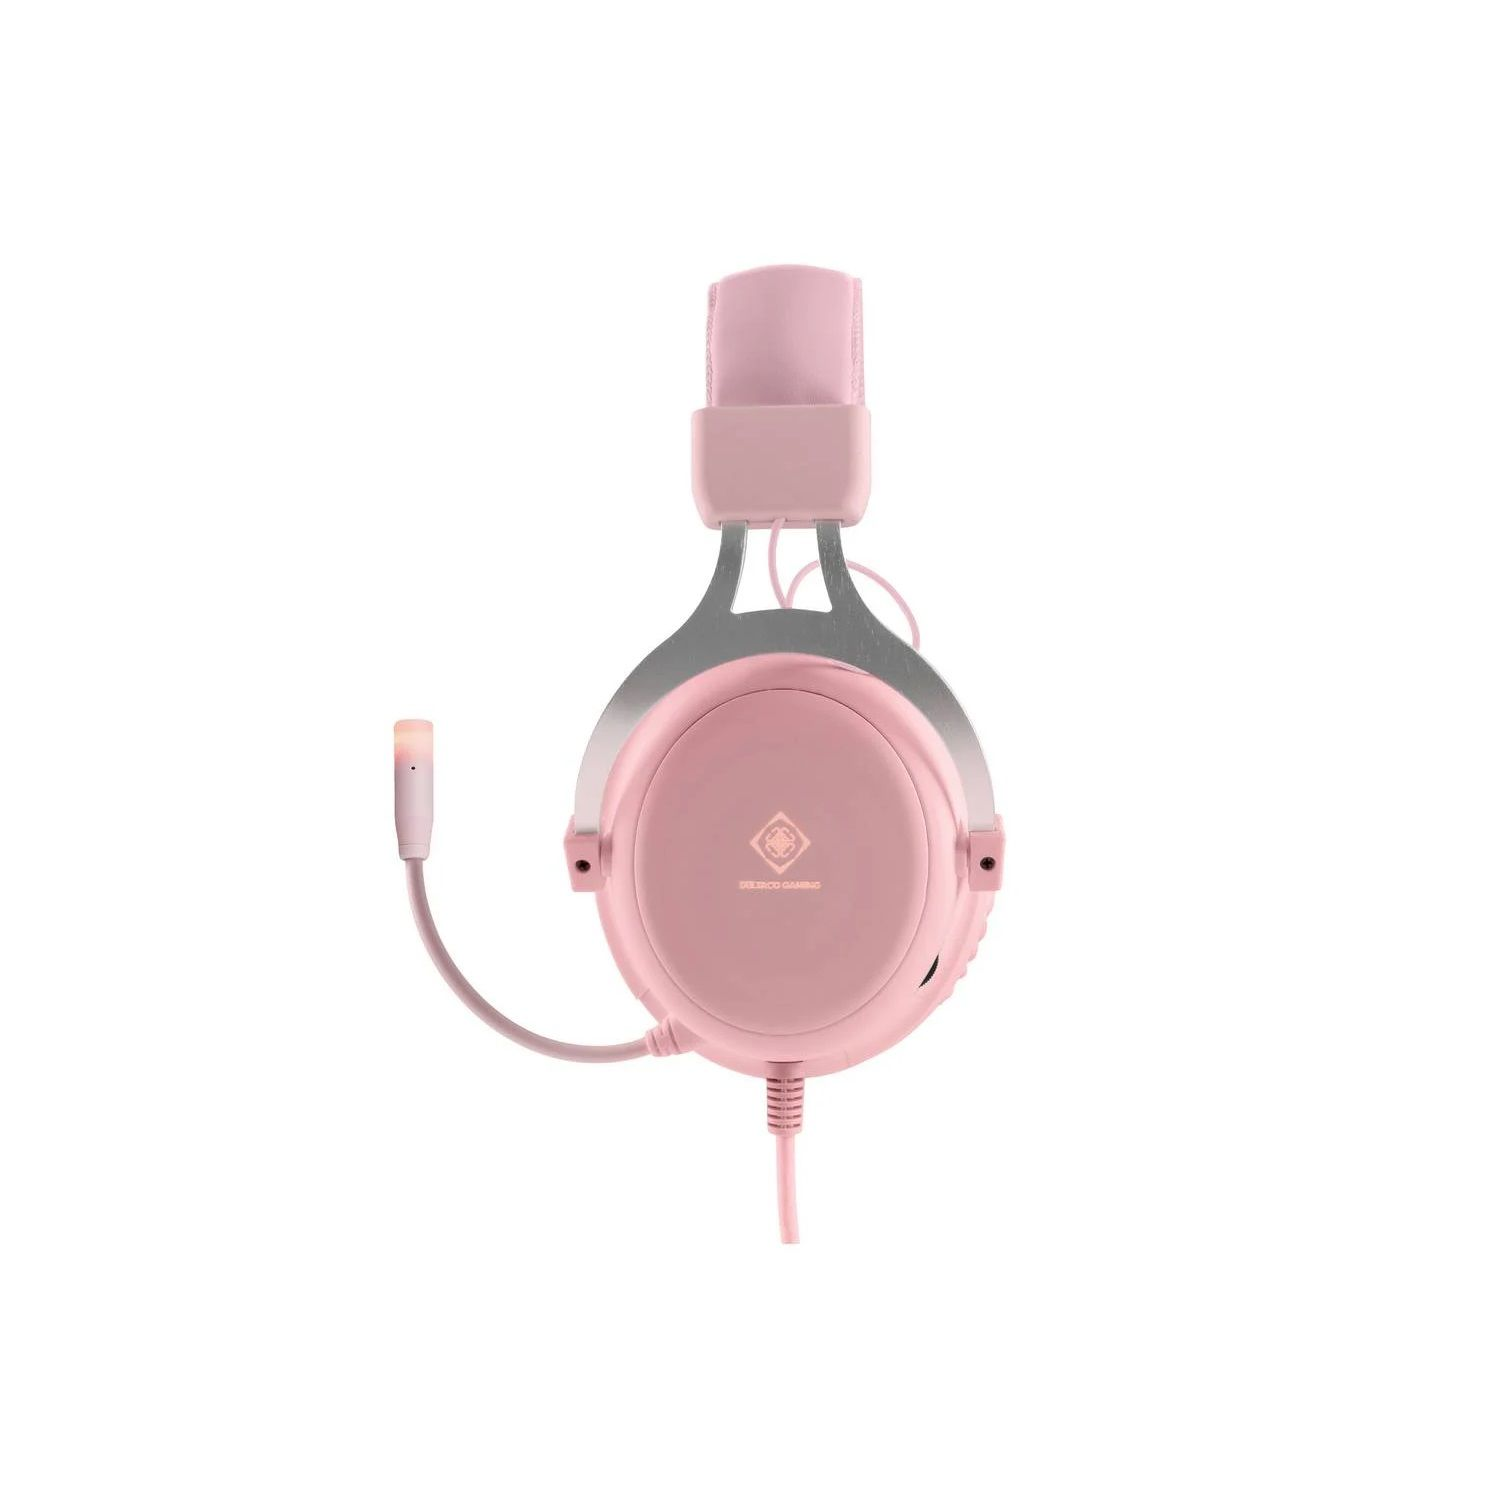 Headset LED-Beleuchtung, GAMING pink DELTACO Over-ear mit Headset Gamer